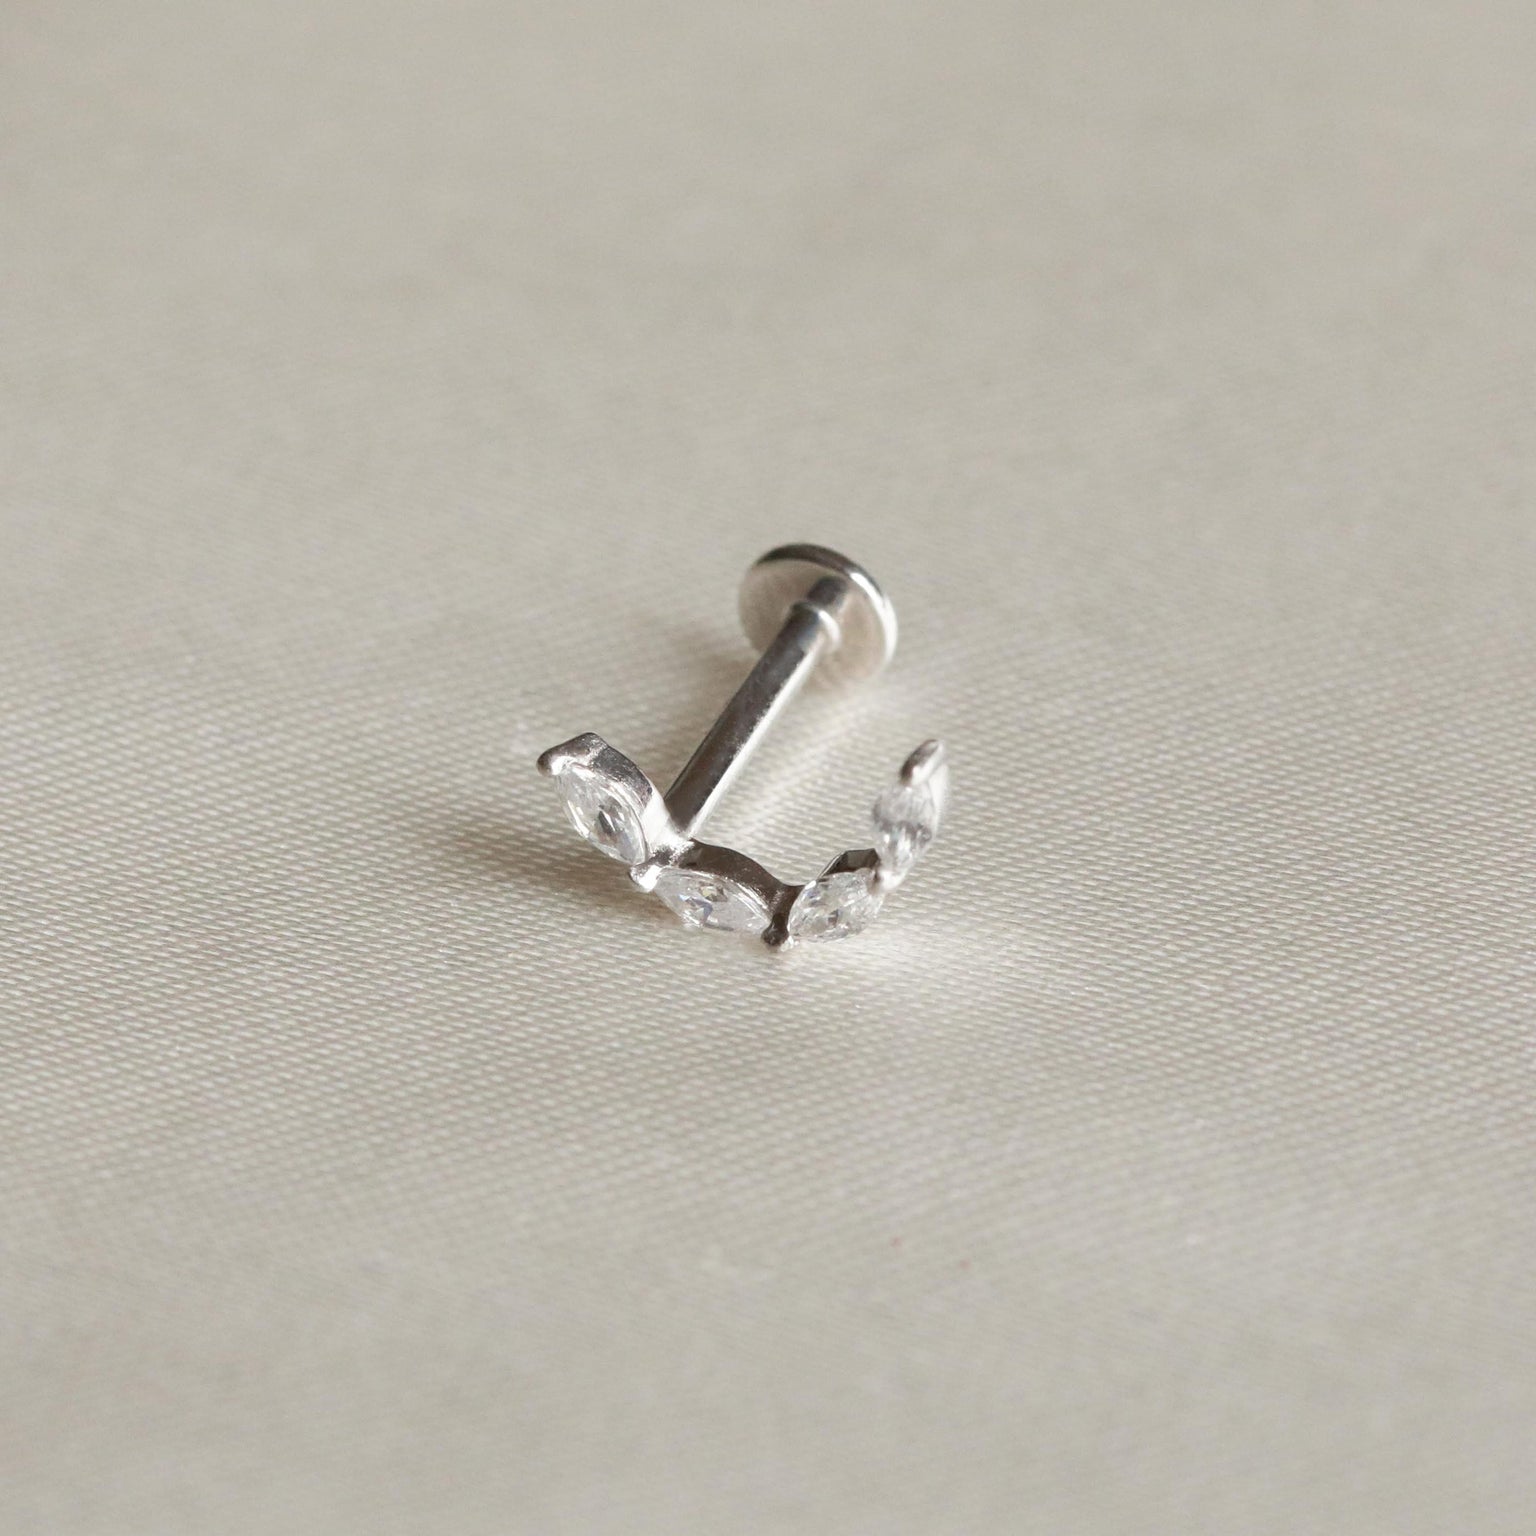 Solid White Gold Crystal Curved Piercing Stud